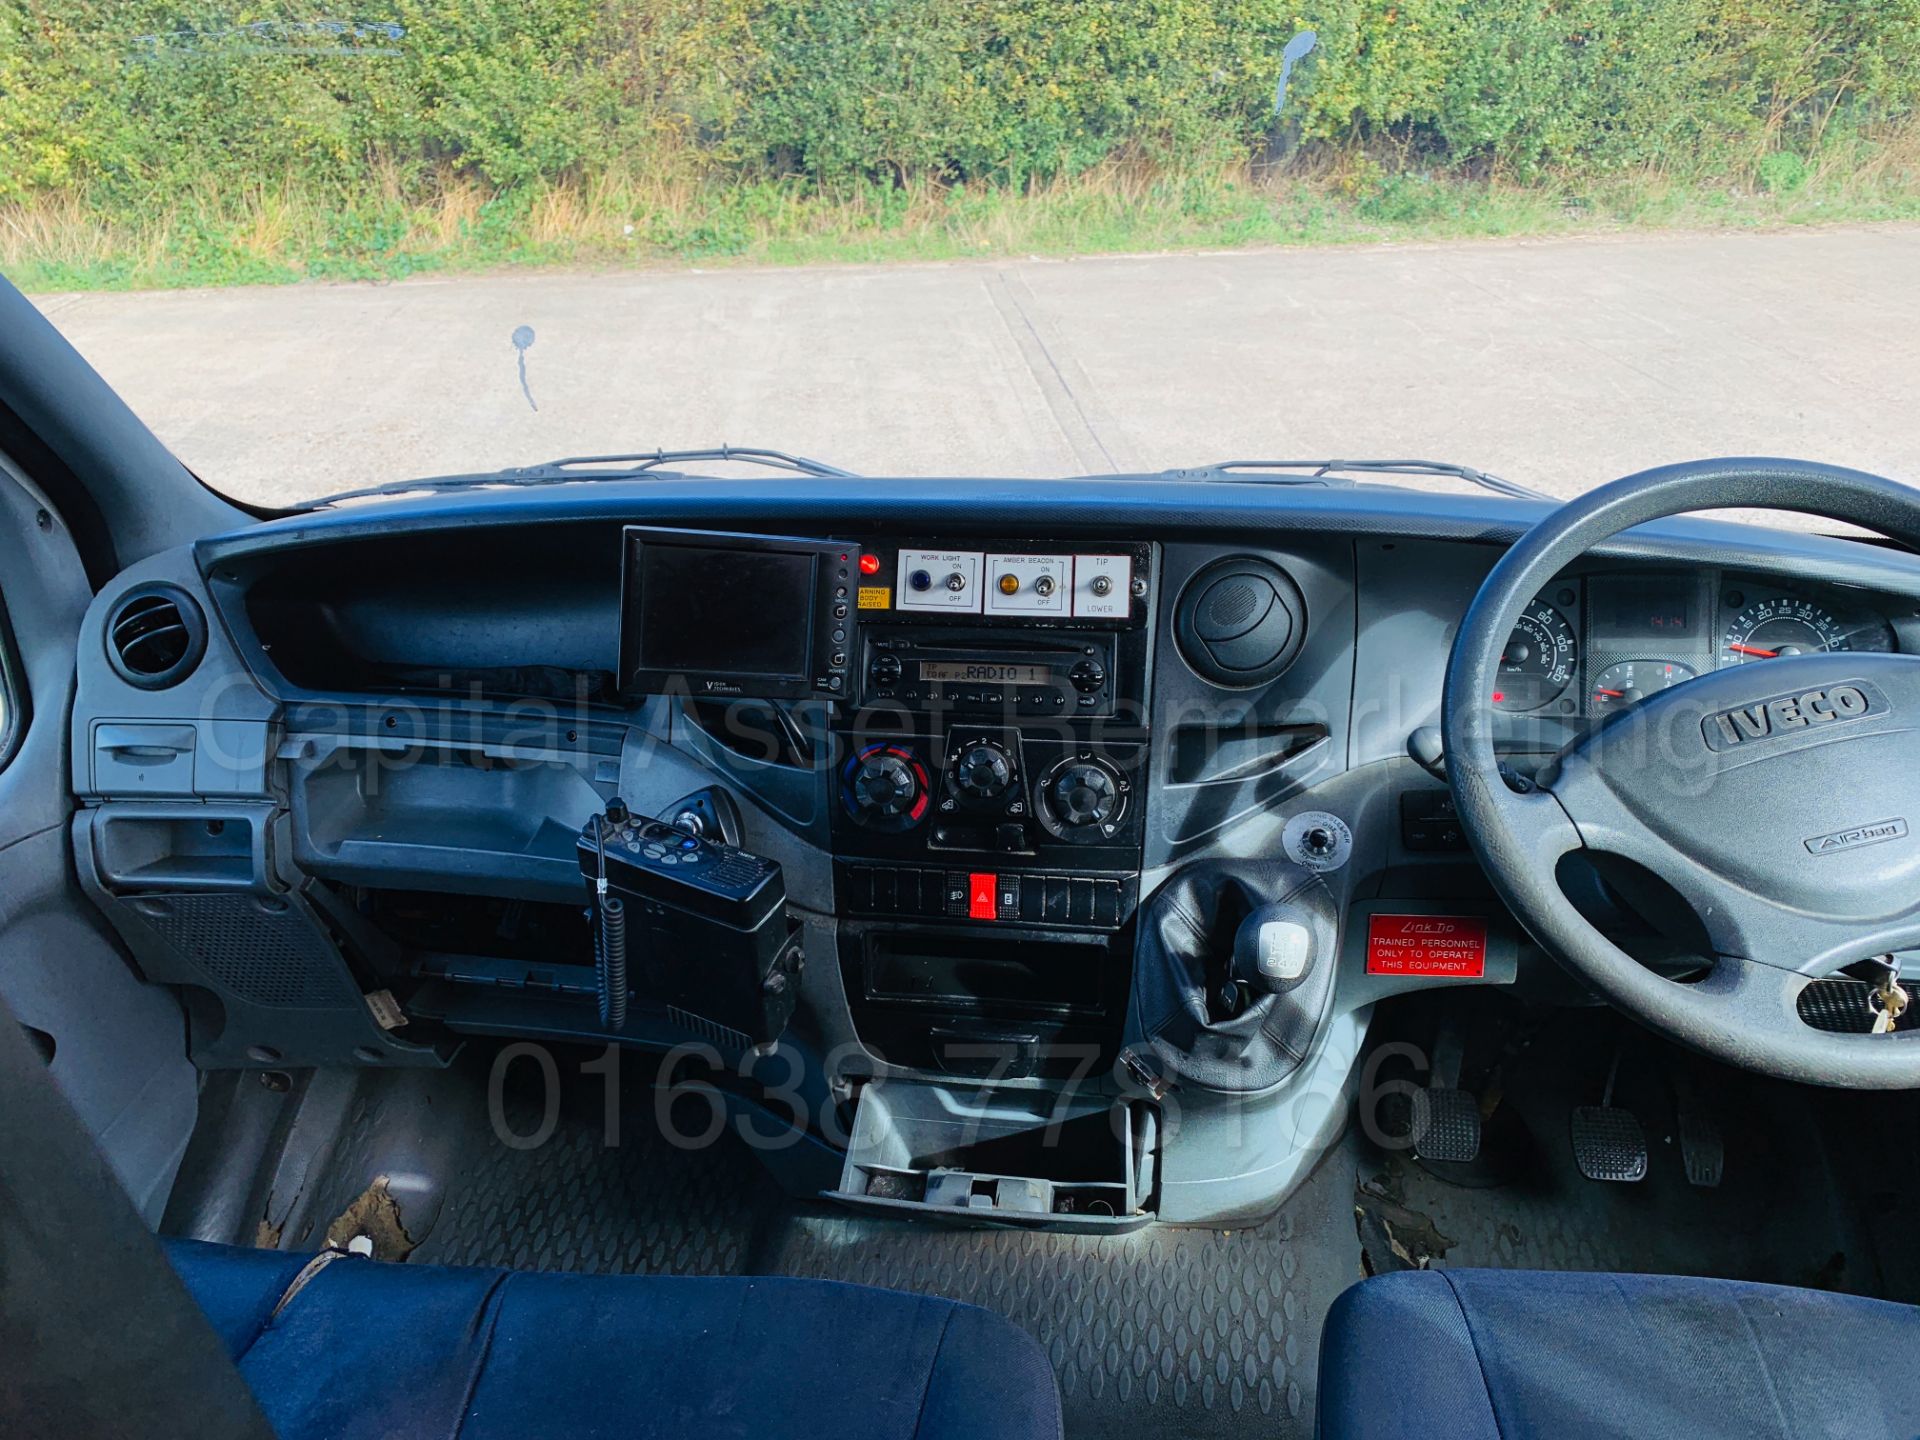 IVECO DAILY 35C12 *D/CAB - TIPPER* (2009 MODEL) '2.3 DIESEL - 115 BHP - 5 SPEED' *LOW MILES* - Image 21 of 29